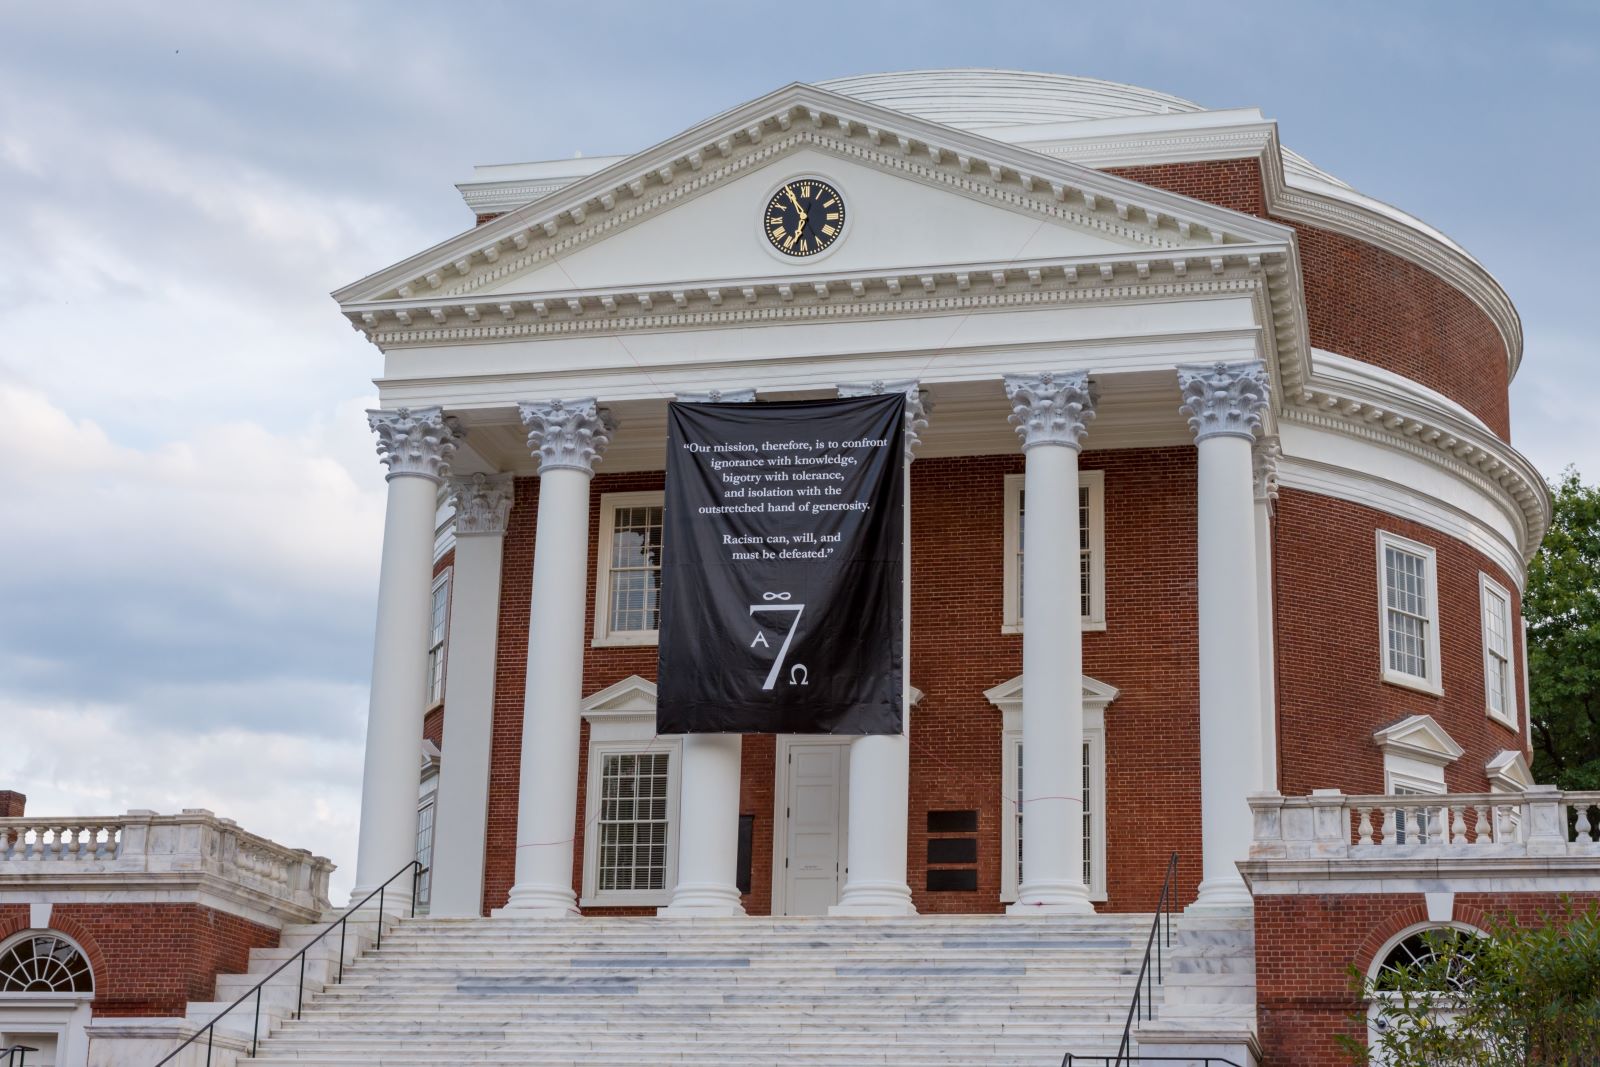 Image Credit: Shutterstock / ss9ug <p>Exclusive to the University of Virginia, members of this secret society are unknown until their death. The society donates generously to the university, emphasizing scholarship and honor among students.</p>